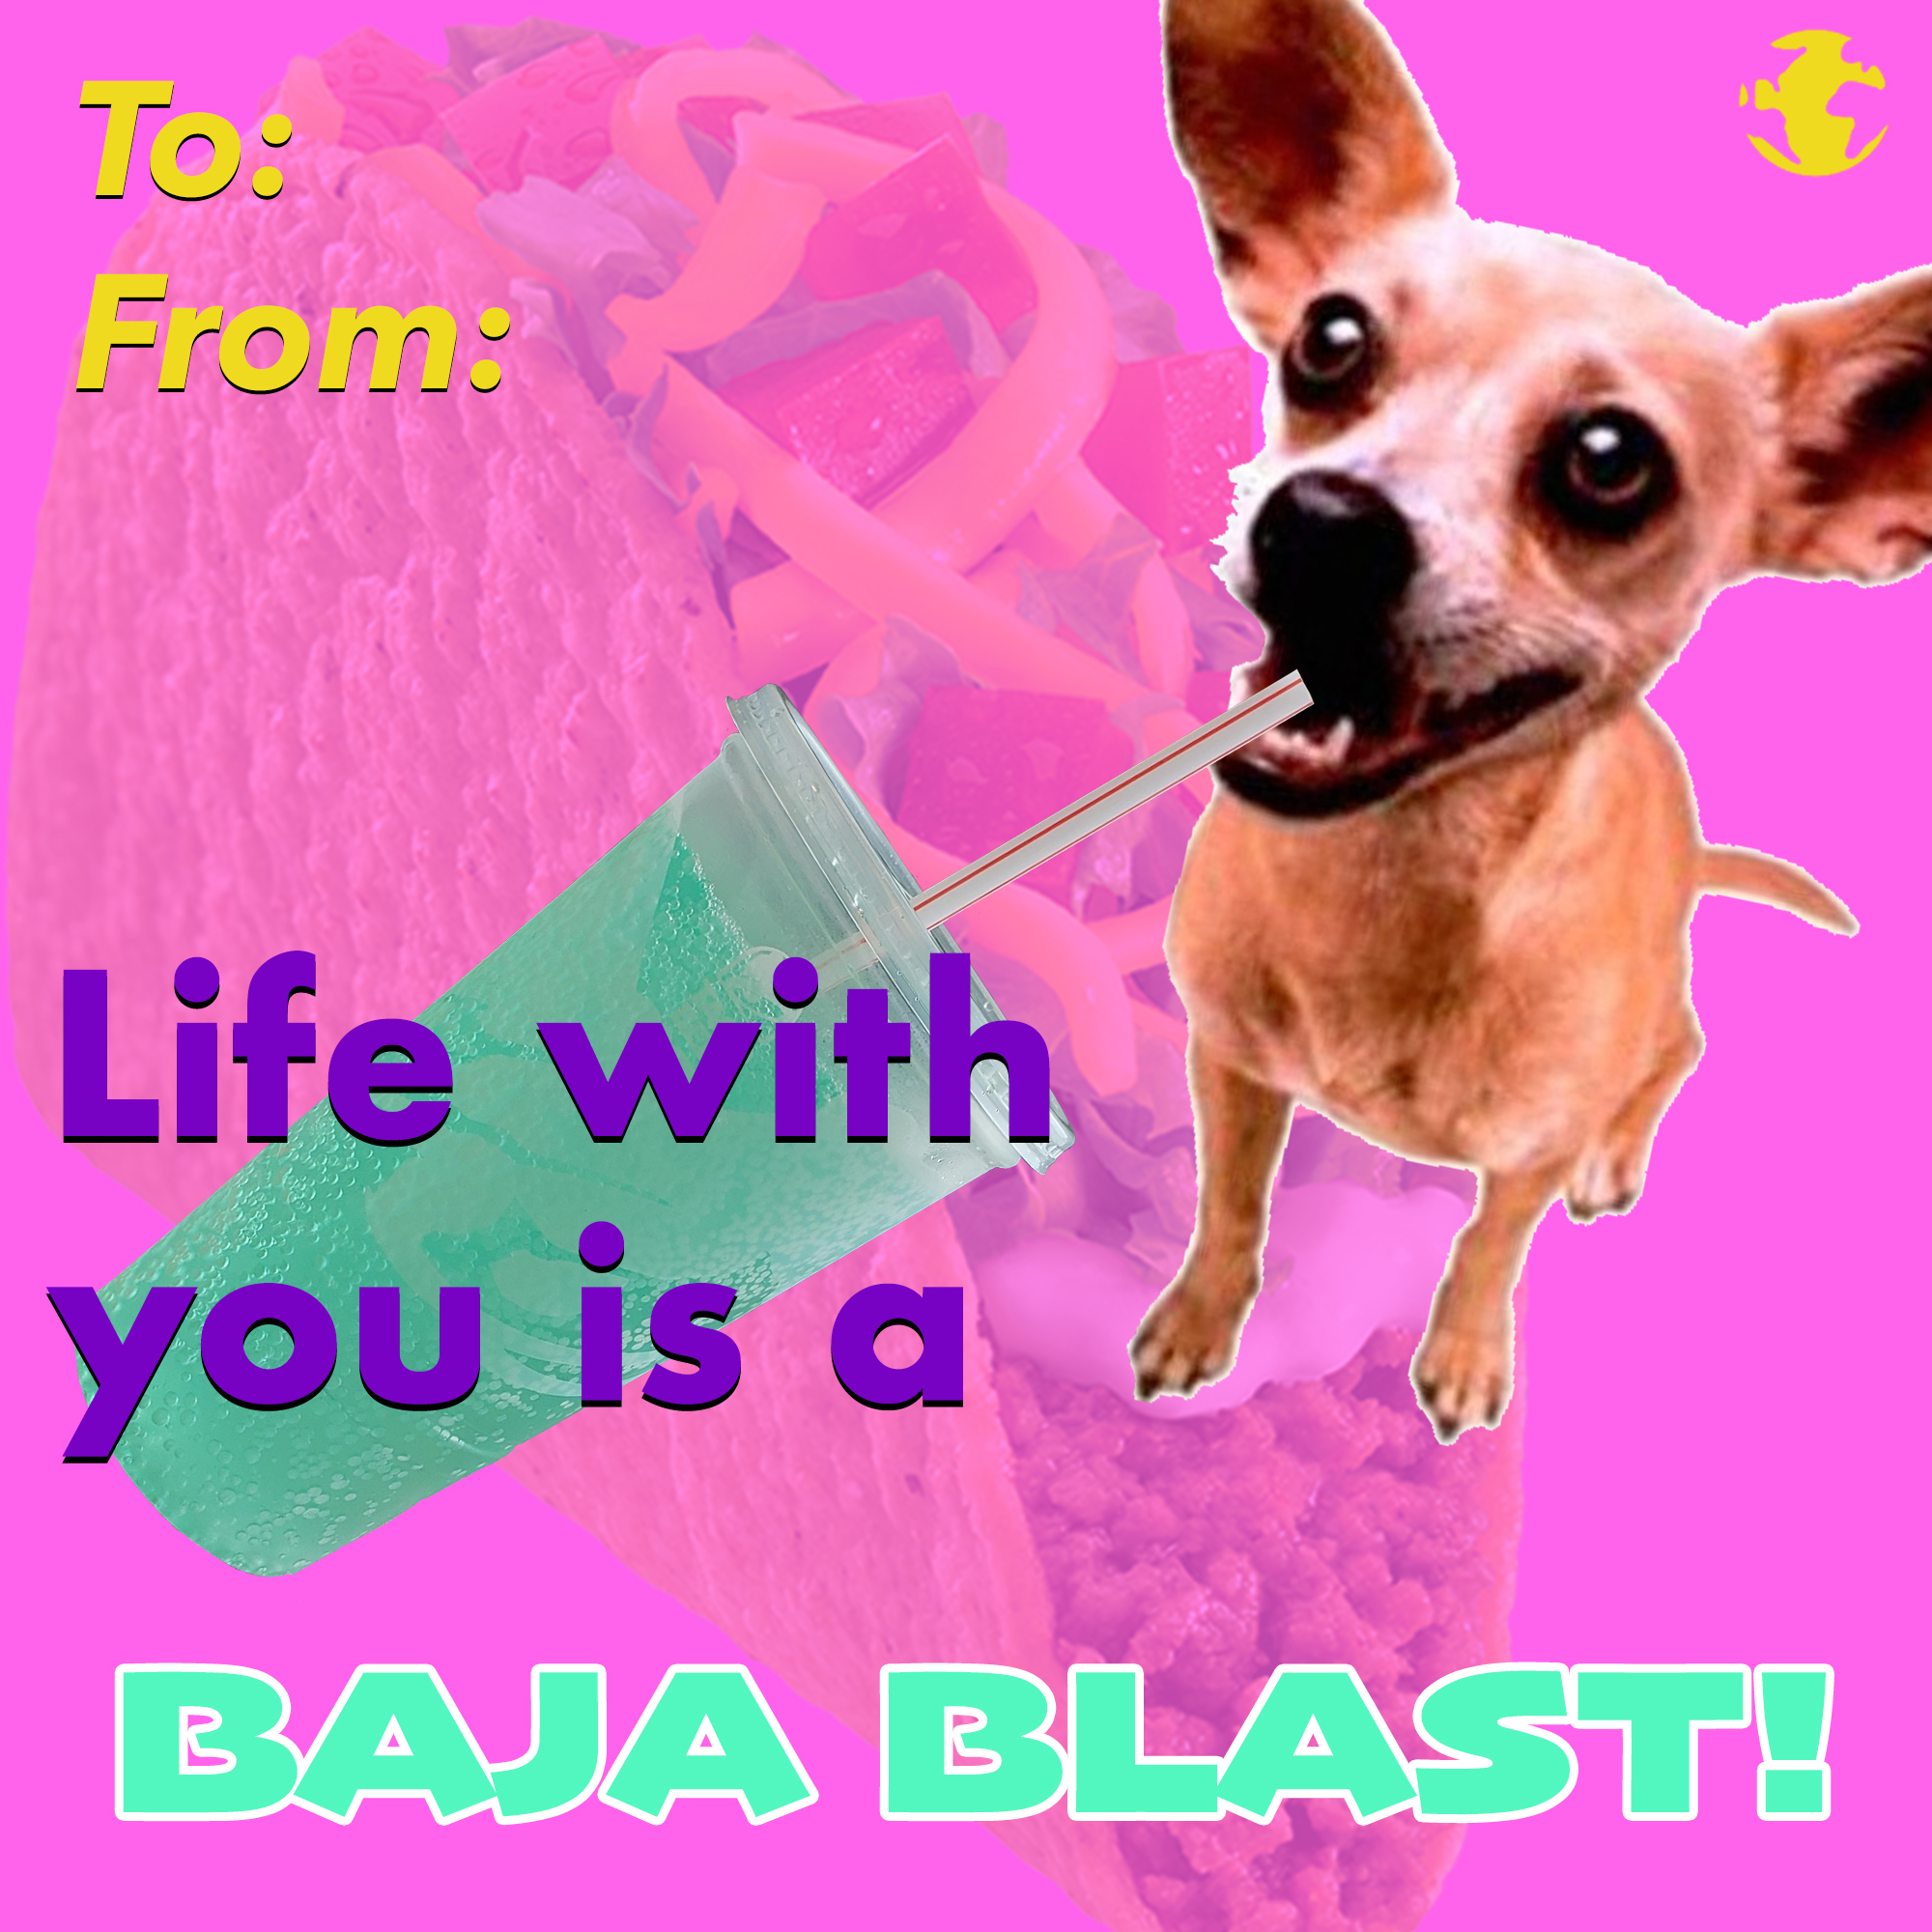 eBaum's Valentine's Day Cards 2022 - dog - To From Life with you is a Baja Blast! B